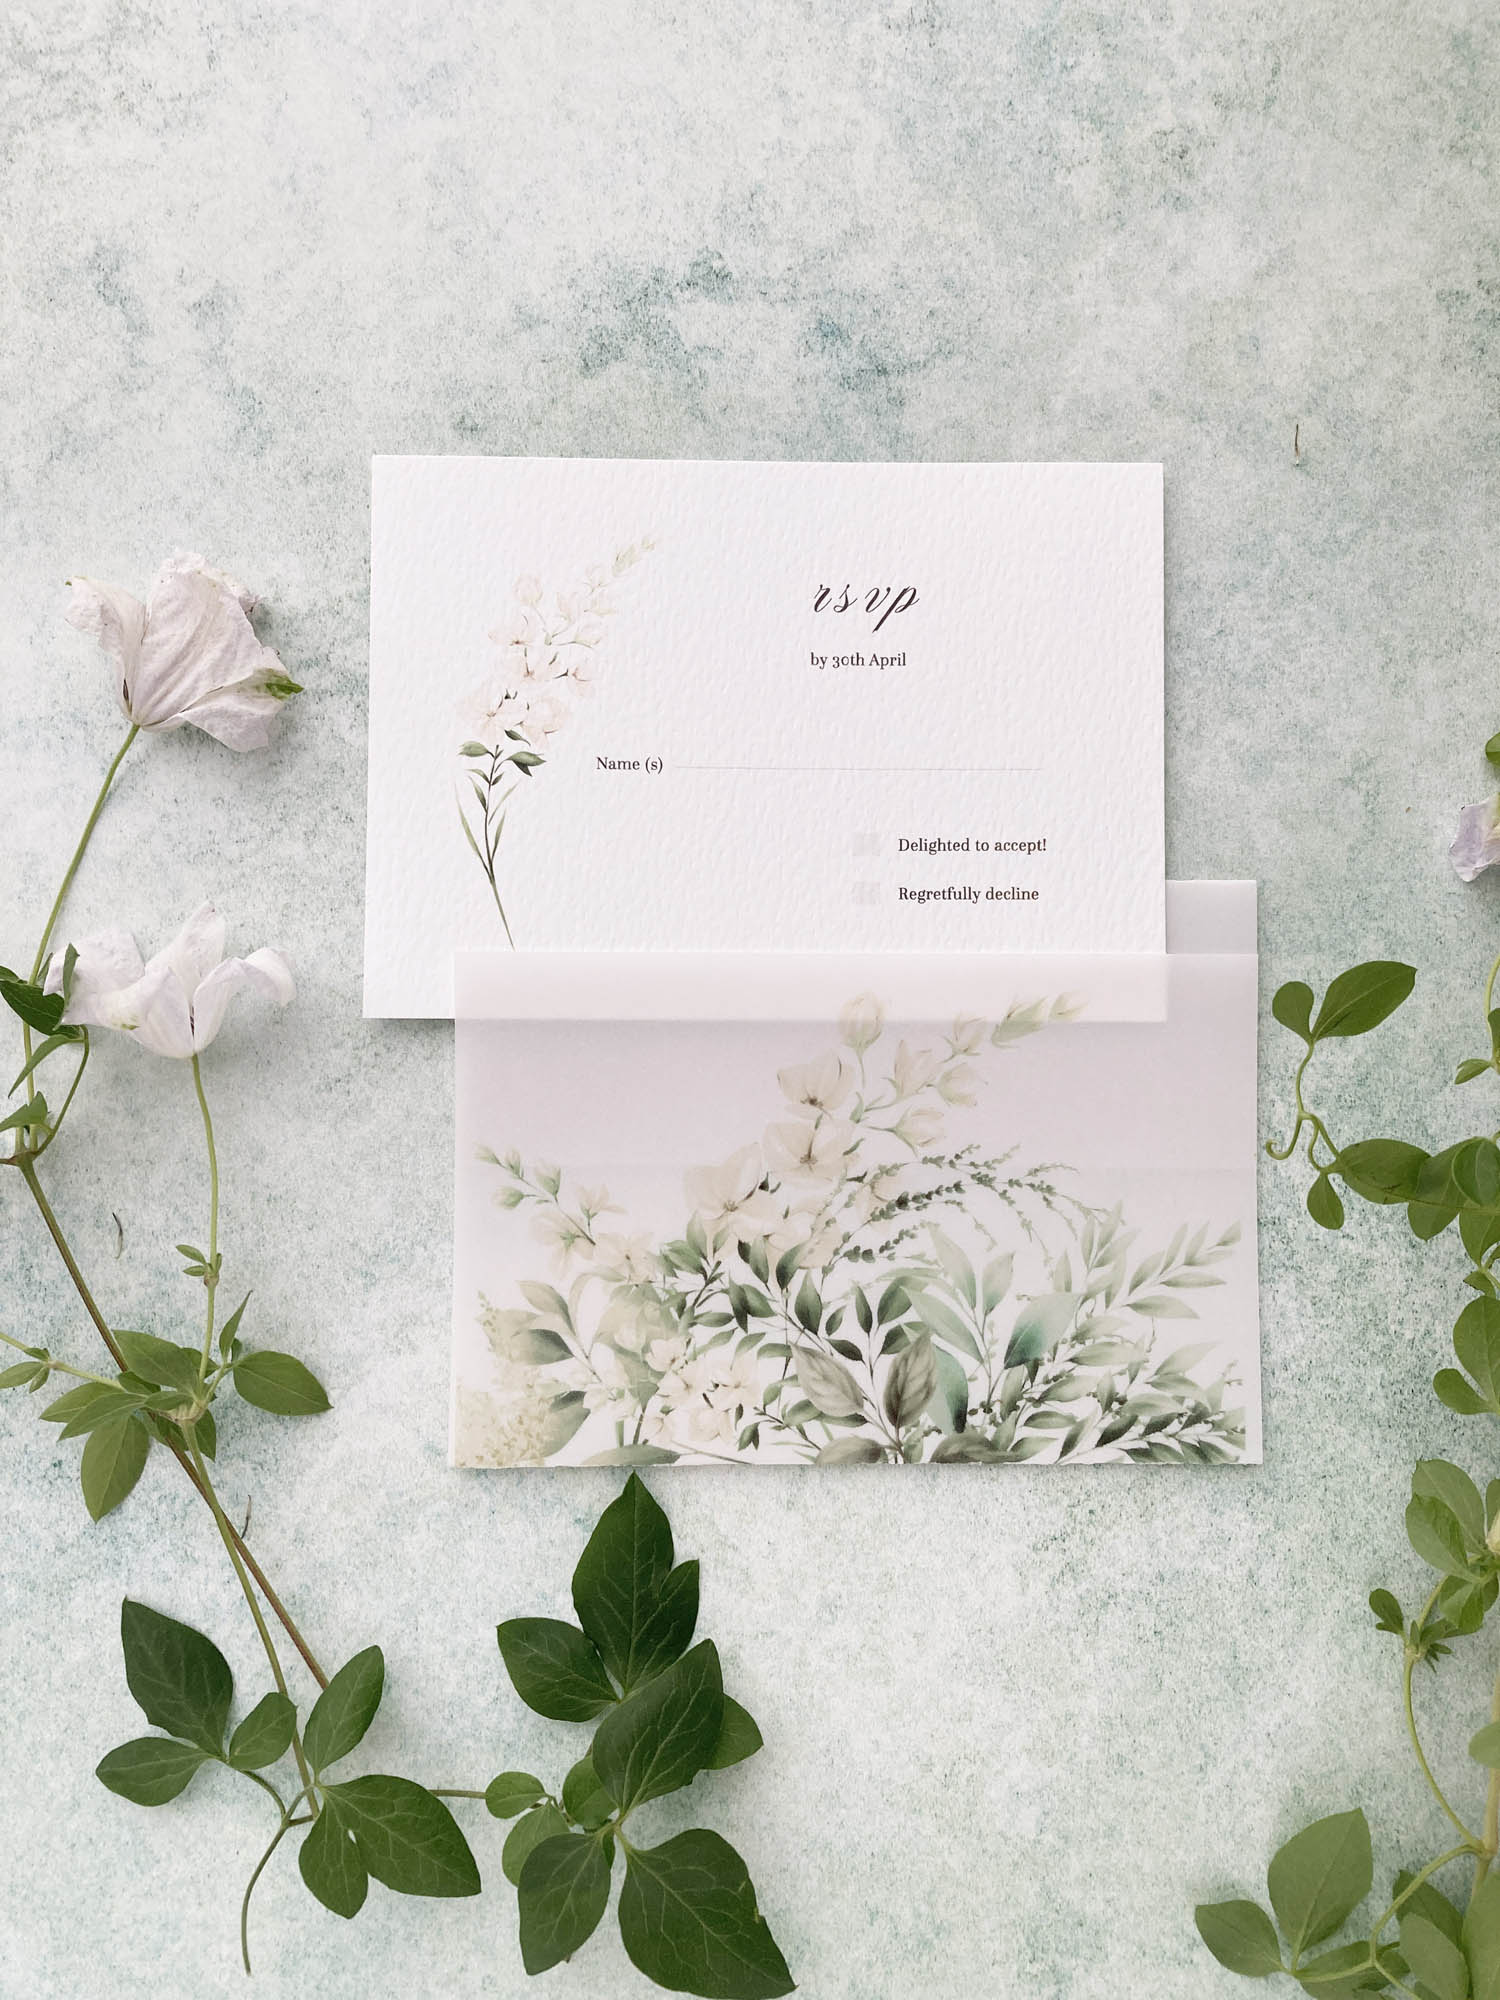 Botanical wedding stationery RSVP card and inserts from By Moon & Tide